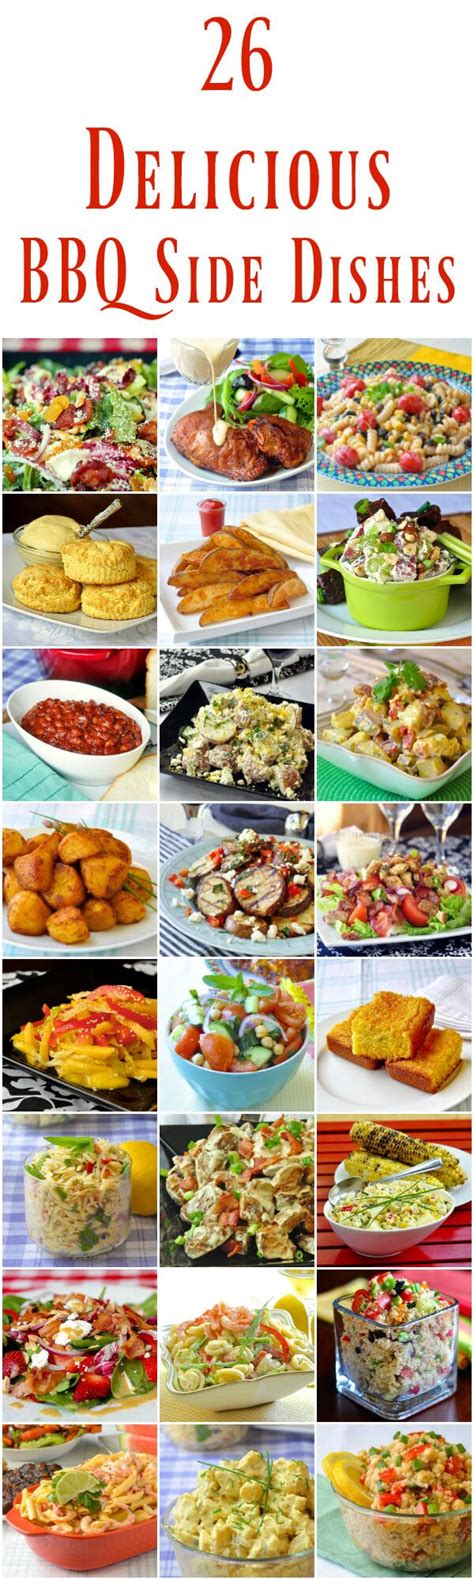 70 bbq side dishes for the most mouthwatering additions to your backyard menus. 1000+ images about Summer BBQ Sides on Pinterest | Easy ...